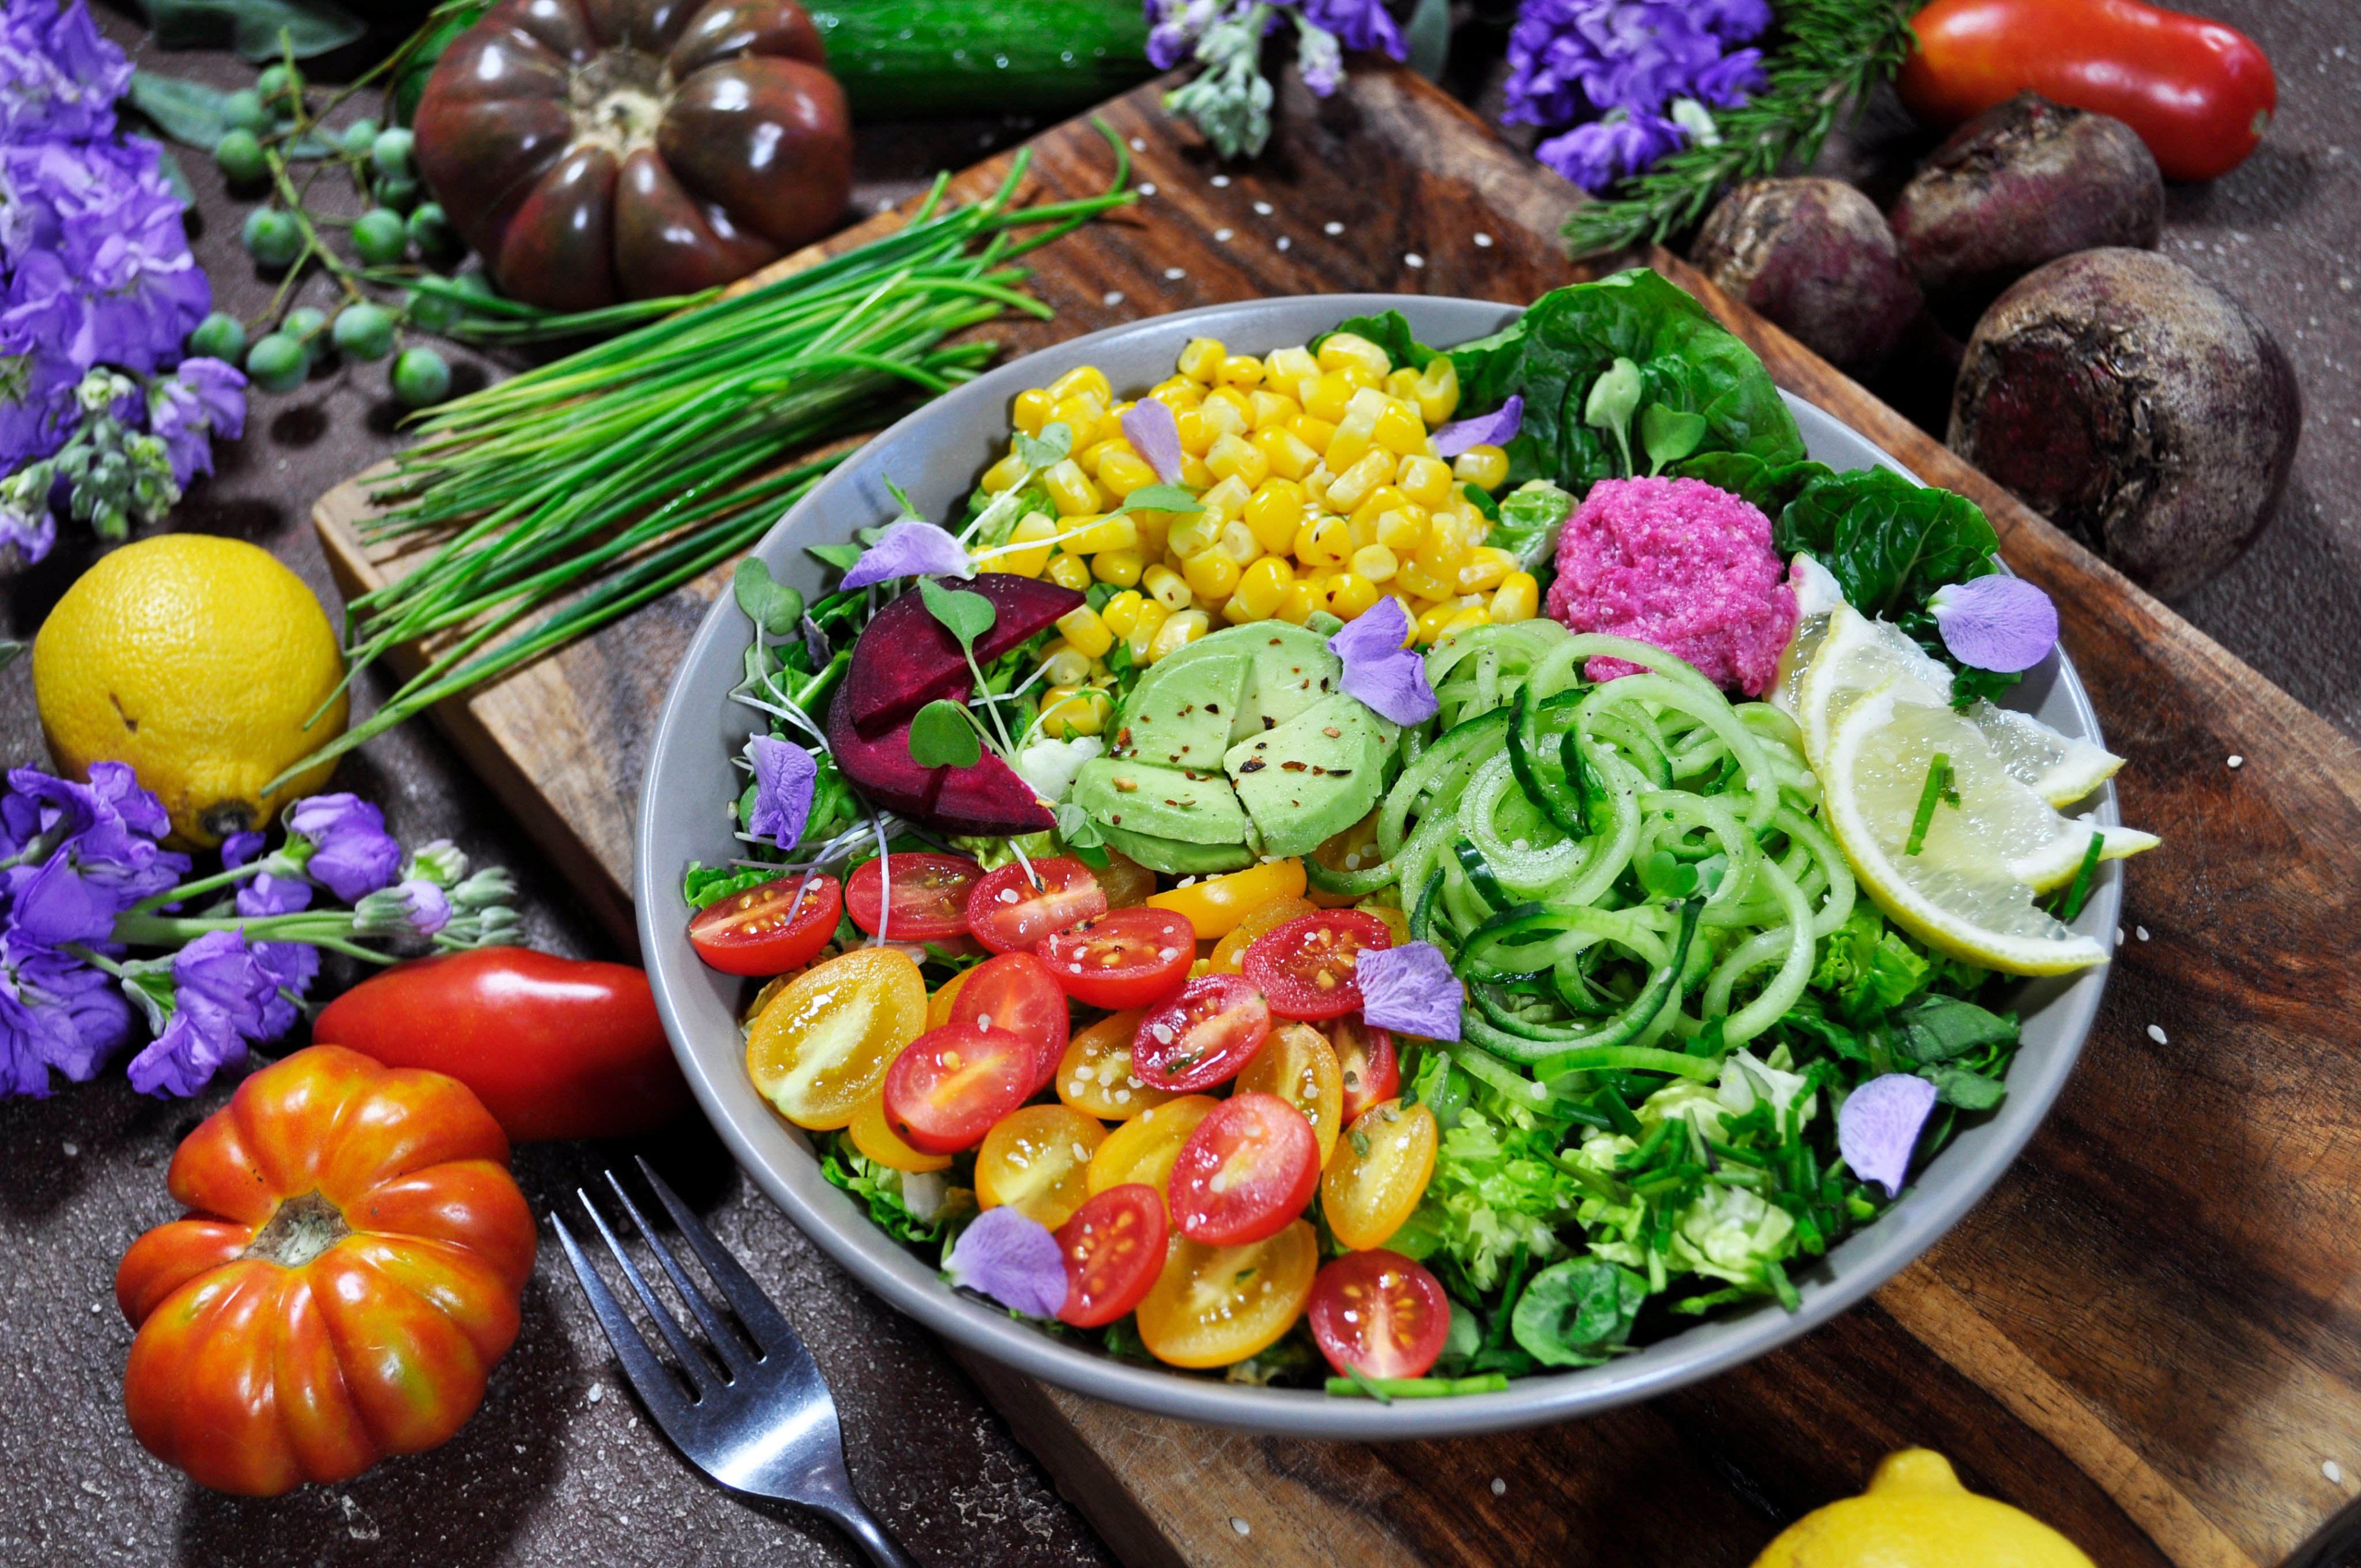 The Mediterranean diet focuses on eating whole, minimally processed foods with an emphasis on plant-based dishes. Photo: Shutterstock 